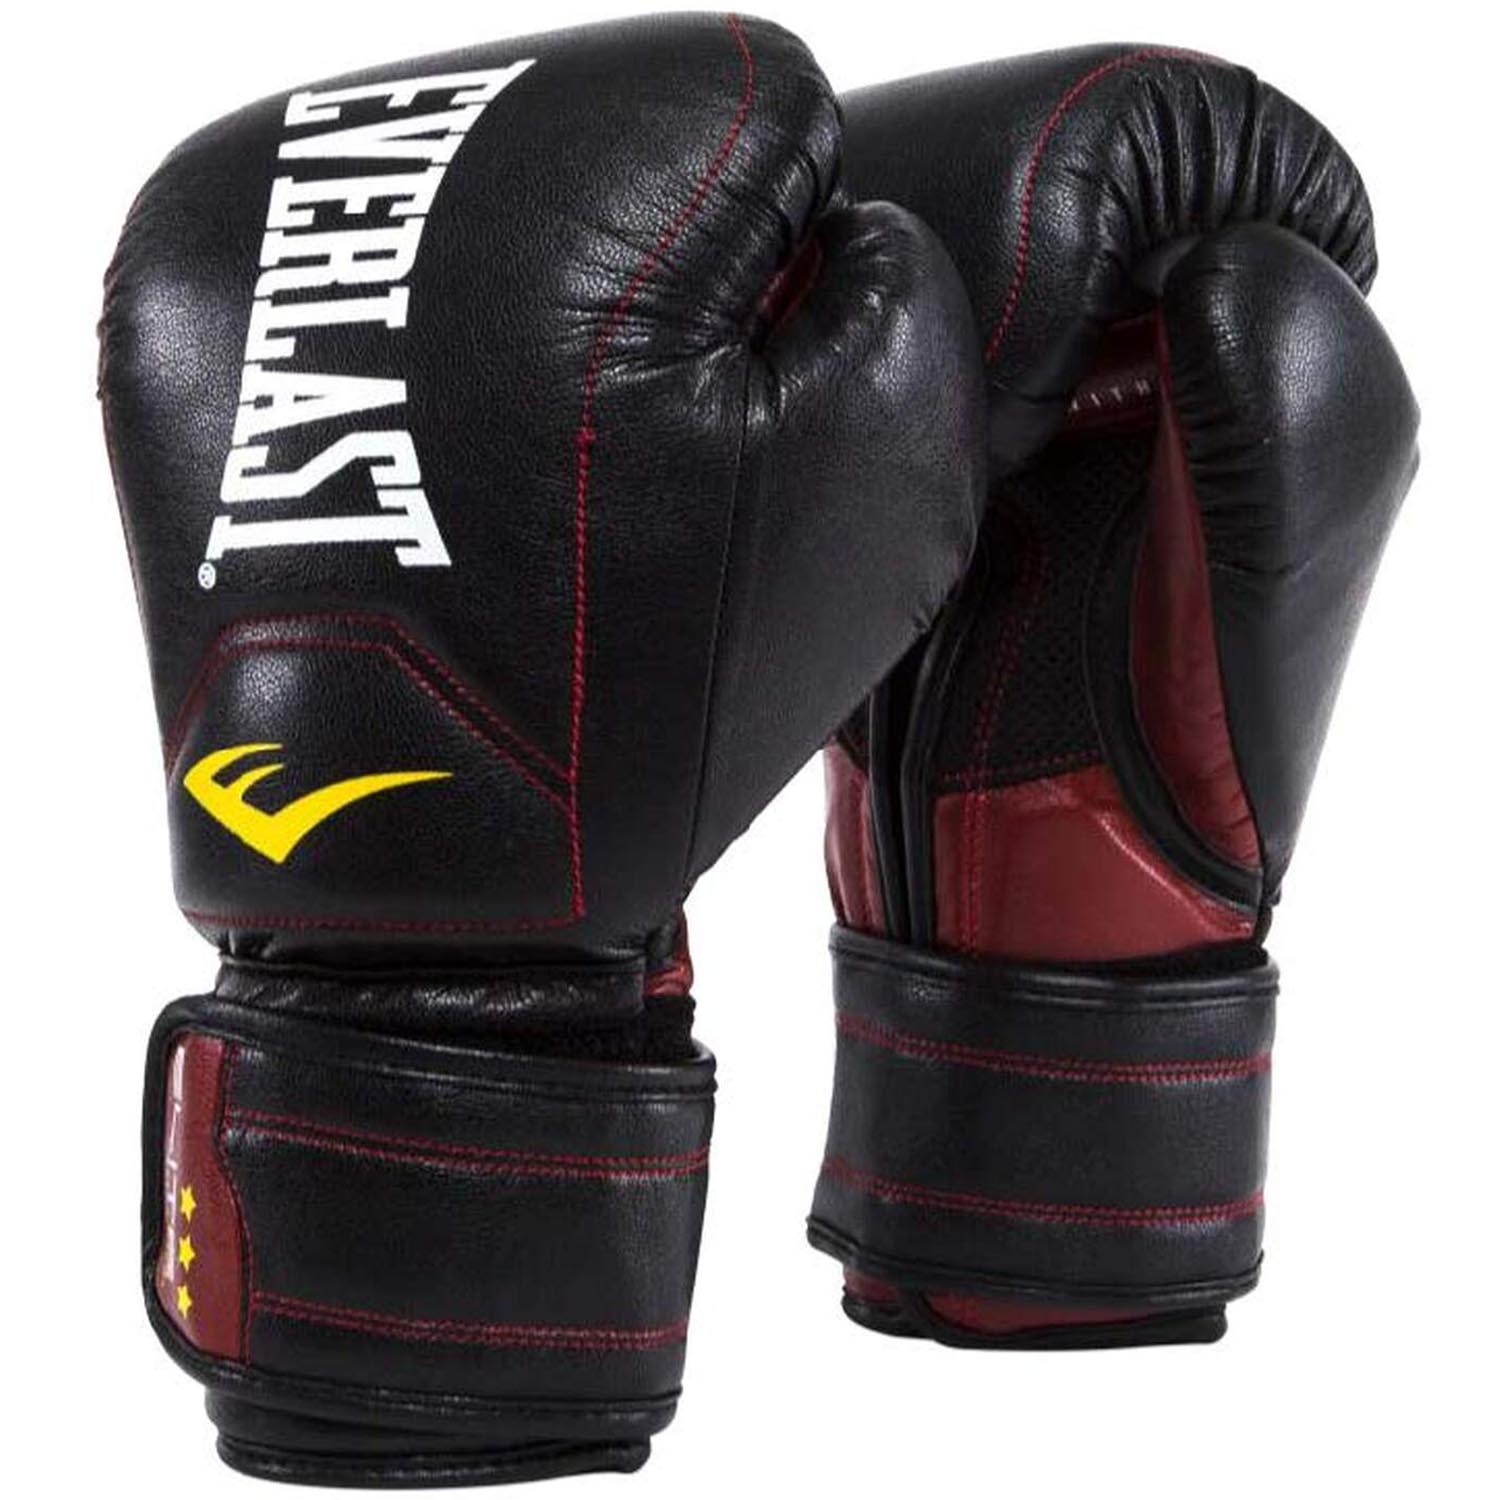 Superior Professional Sparring Boxing Gloves Muay Thai Kickboxing gloves MMA PRO 